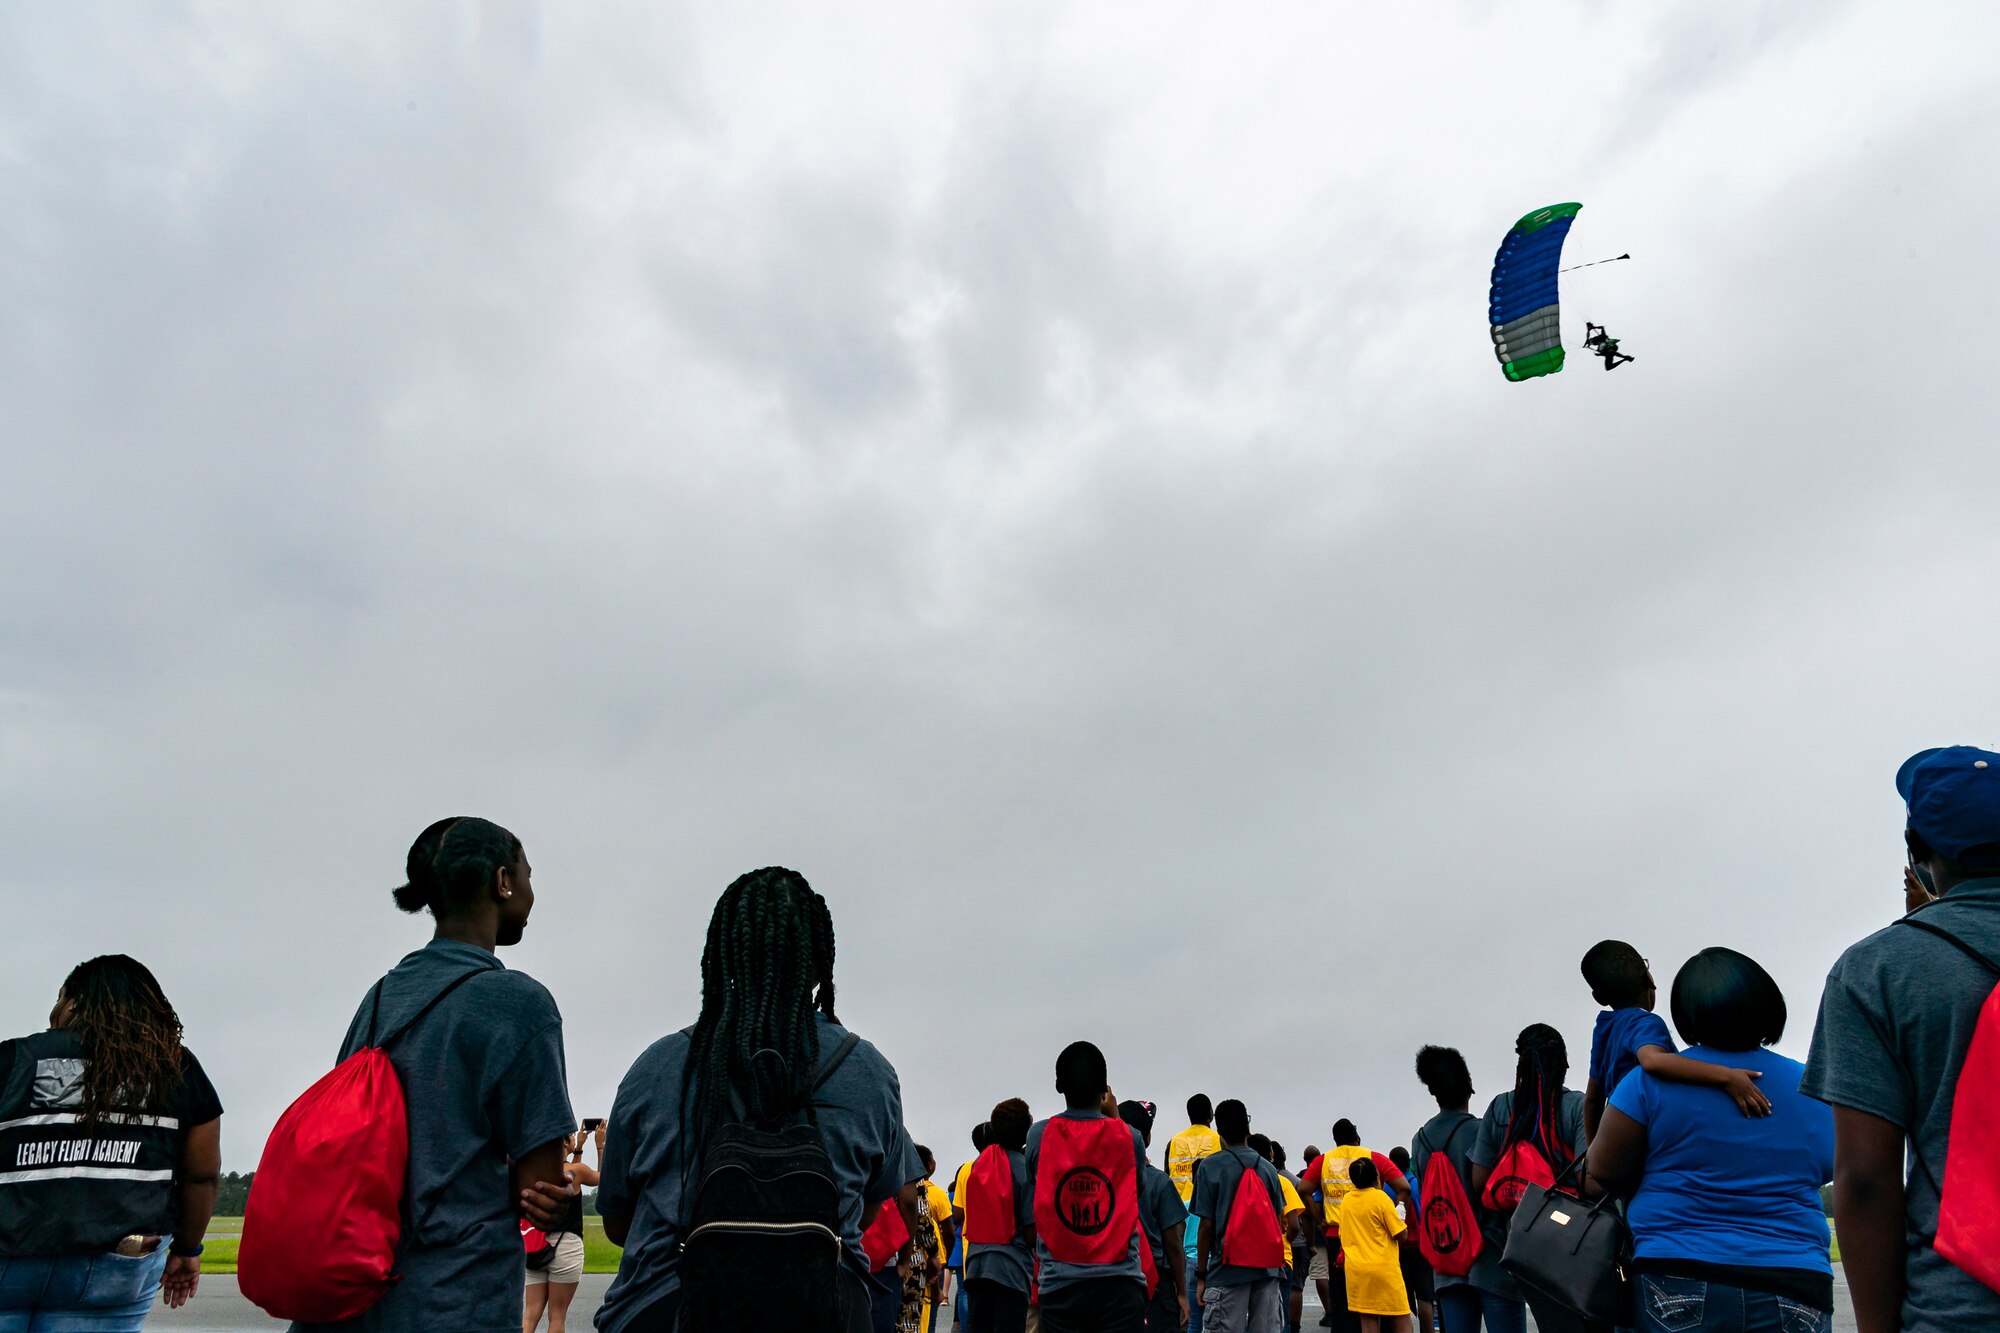 Participants watch a skydiver during the Eyes Above the Horizon diversity outreach program, July 13, 2019, in Valdosta, Ga. The Valdosta Regional Airport hosted the Legacy Flight Academy and over 60 youths ranging in age from 10-19 for a day of flight introduction and immersion into the legacy of the historic Tuskegee Airmen. The program is designed to remove barriers for underrepresented minorities and inspire an interest in aerospace careers. (U.S. Air Force photo by Airman 1st Class Hayden Legg)